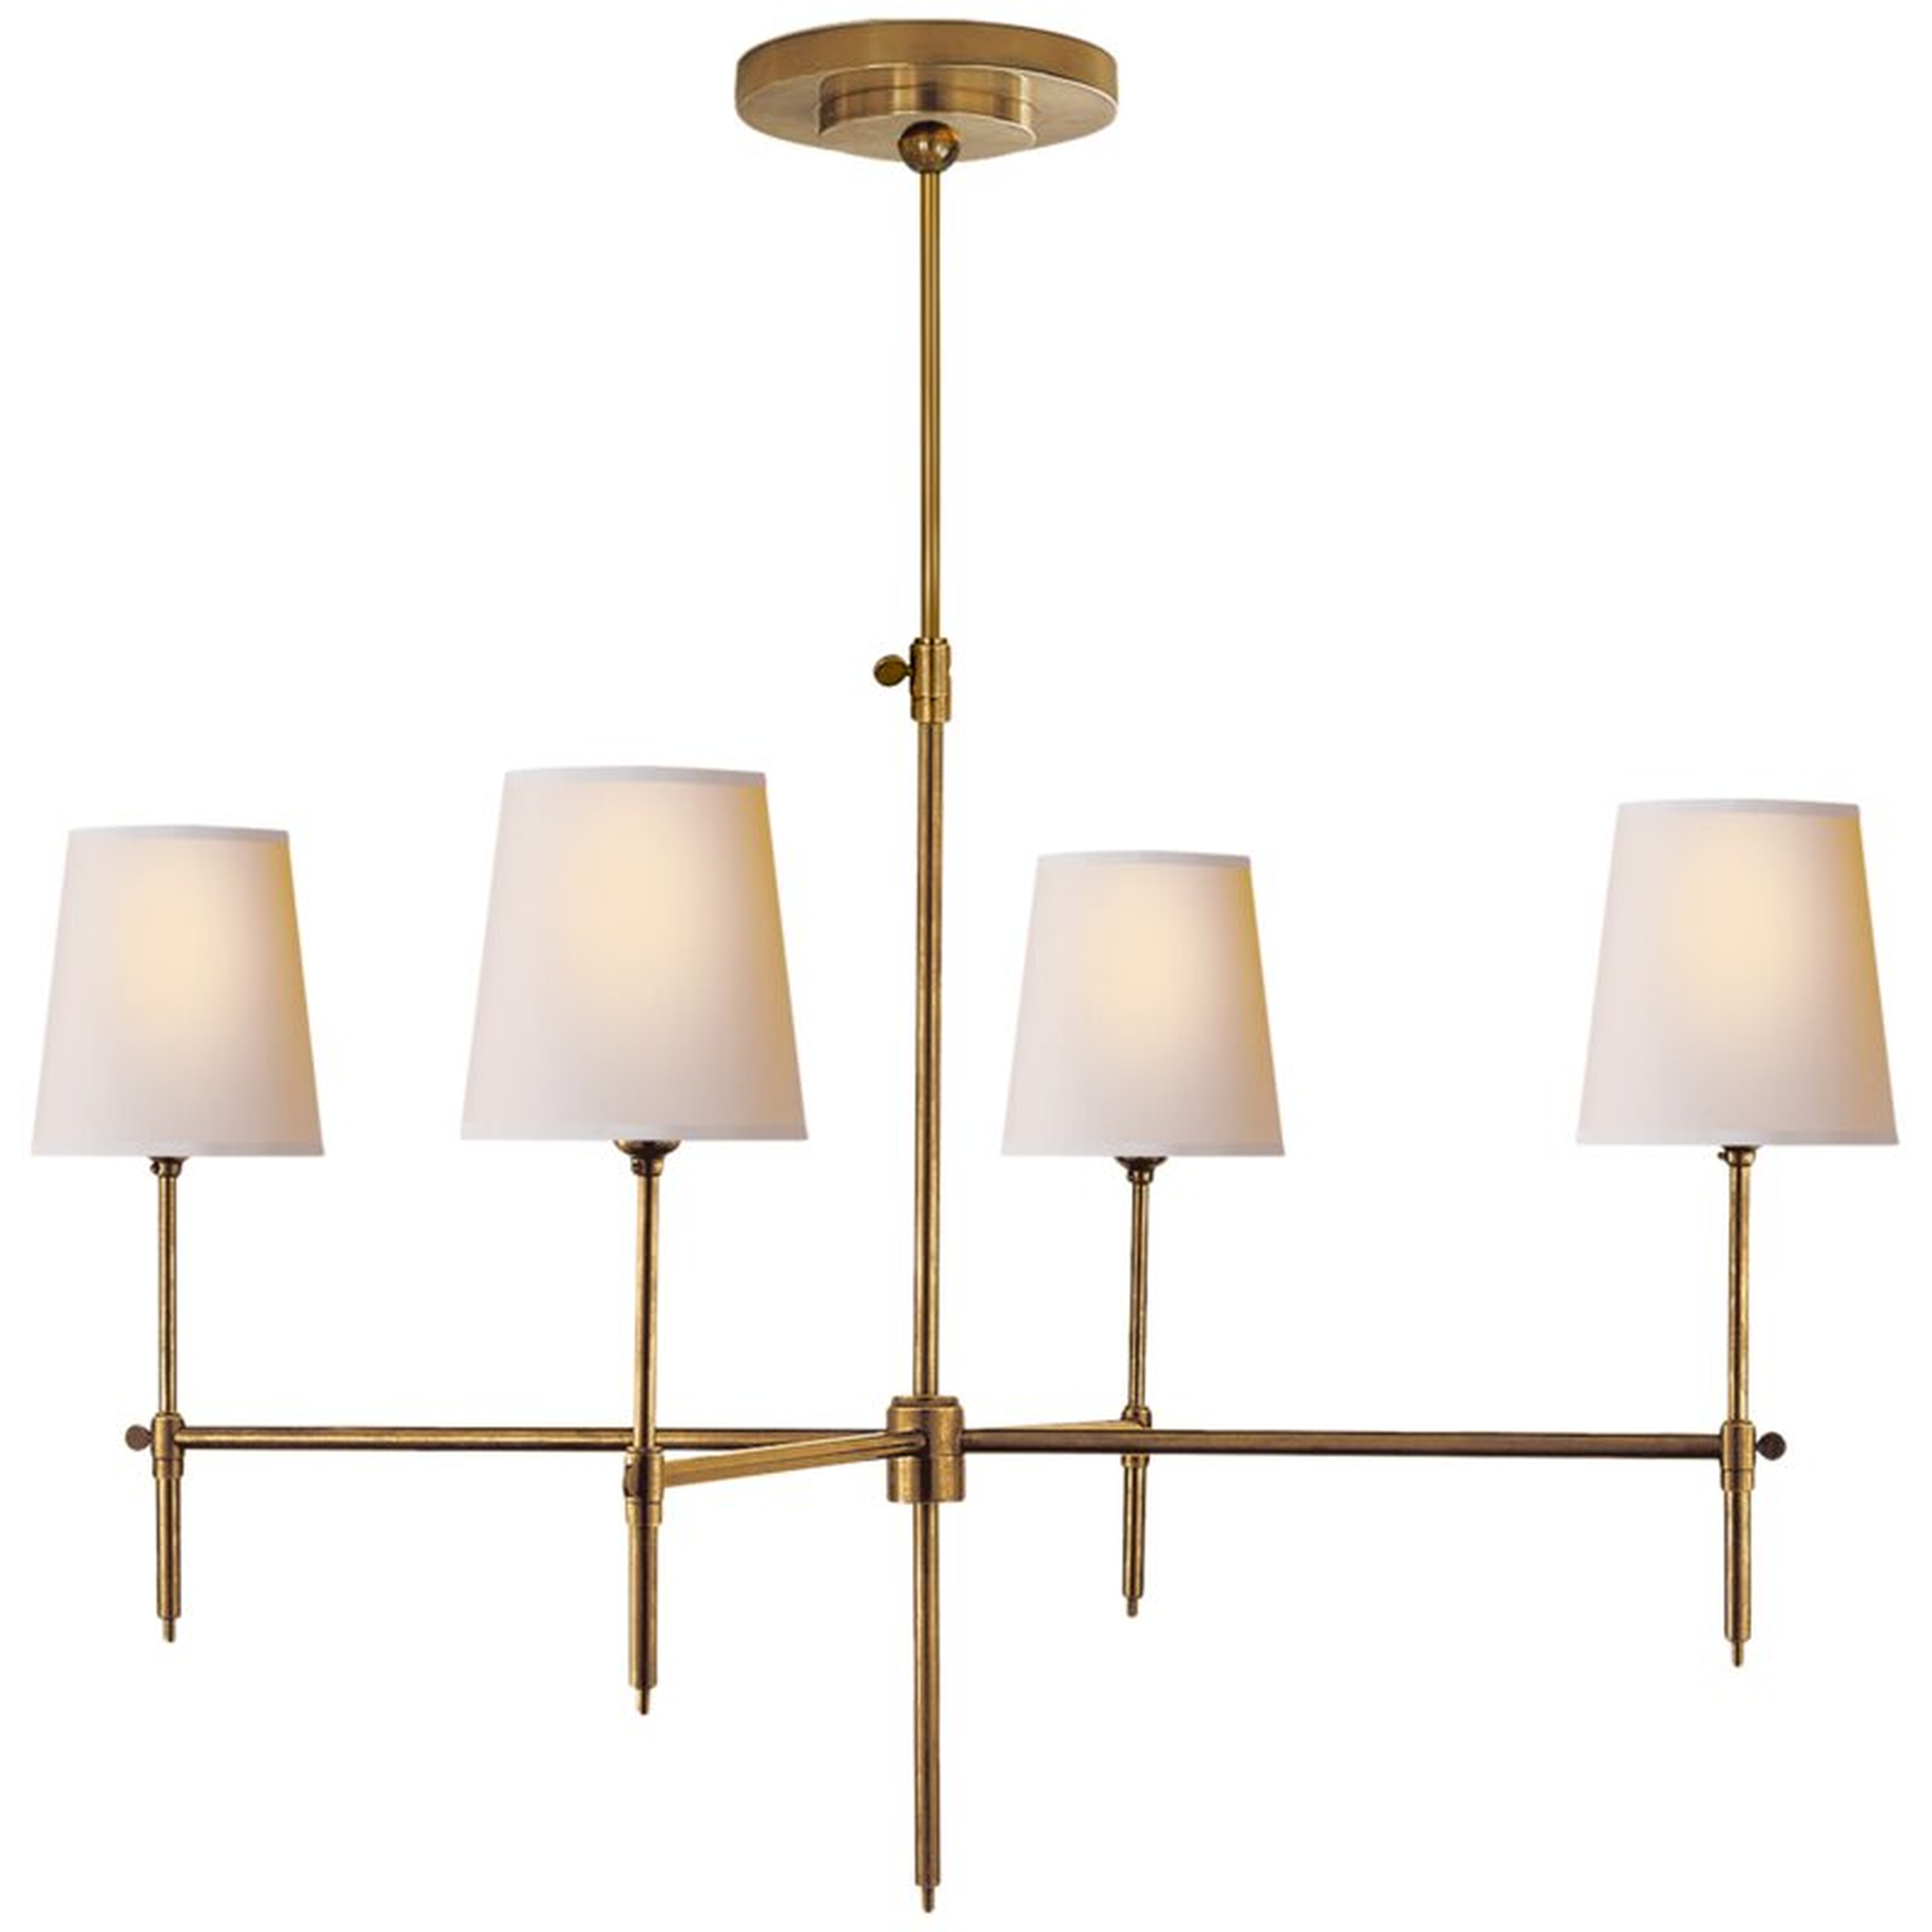 Visual Comfort Thomas O'Brien 4 - Light Shaded Classic / Traditional Chandelier Finish: Hand-Rubbed Antique Brass, Size: 28" H x 36" W x 36" D - Perigold